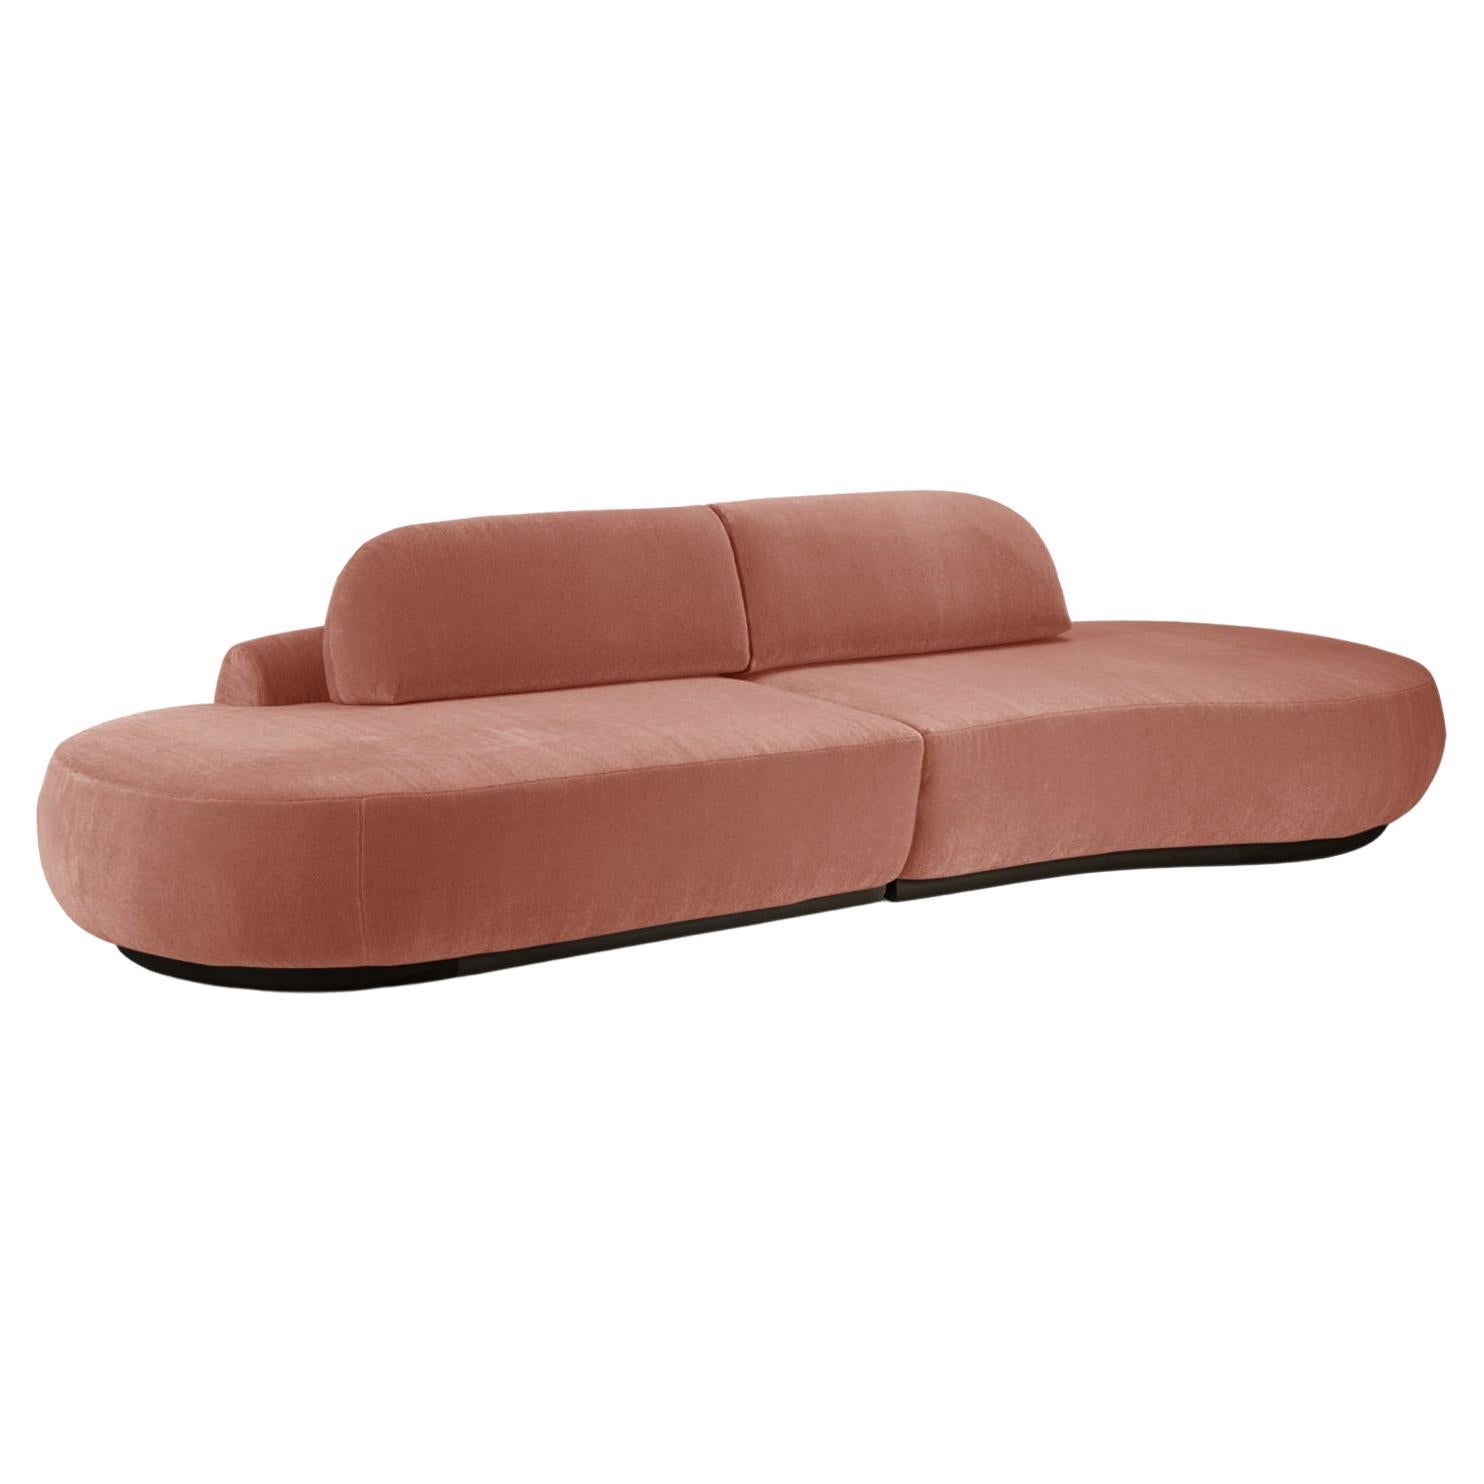 Naked Curved Sectional Sofa, 2 Piece with Beech Ash-056-5 and Paris Brick For Sale